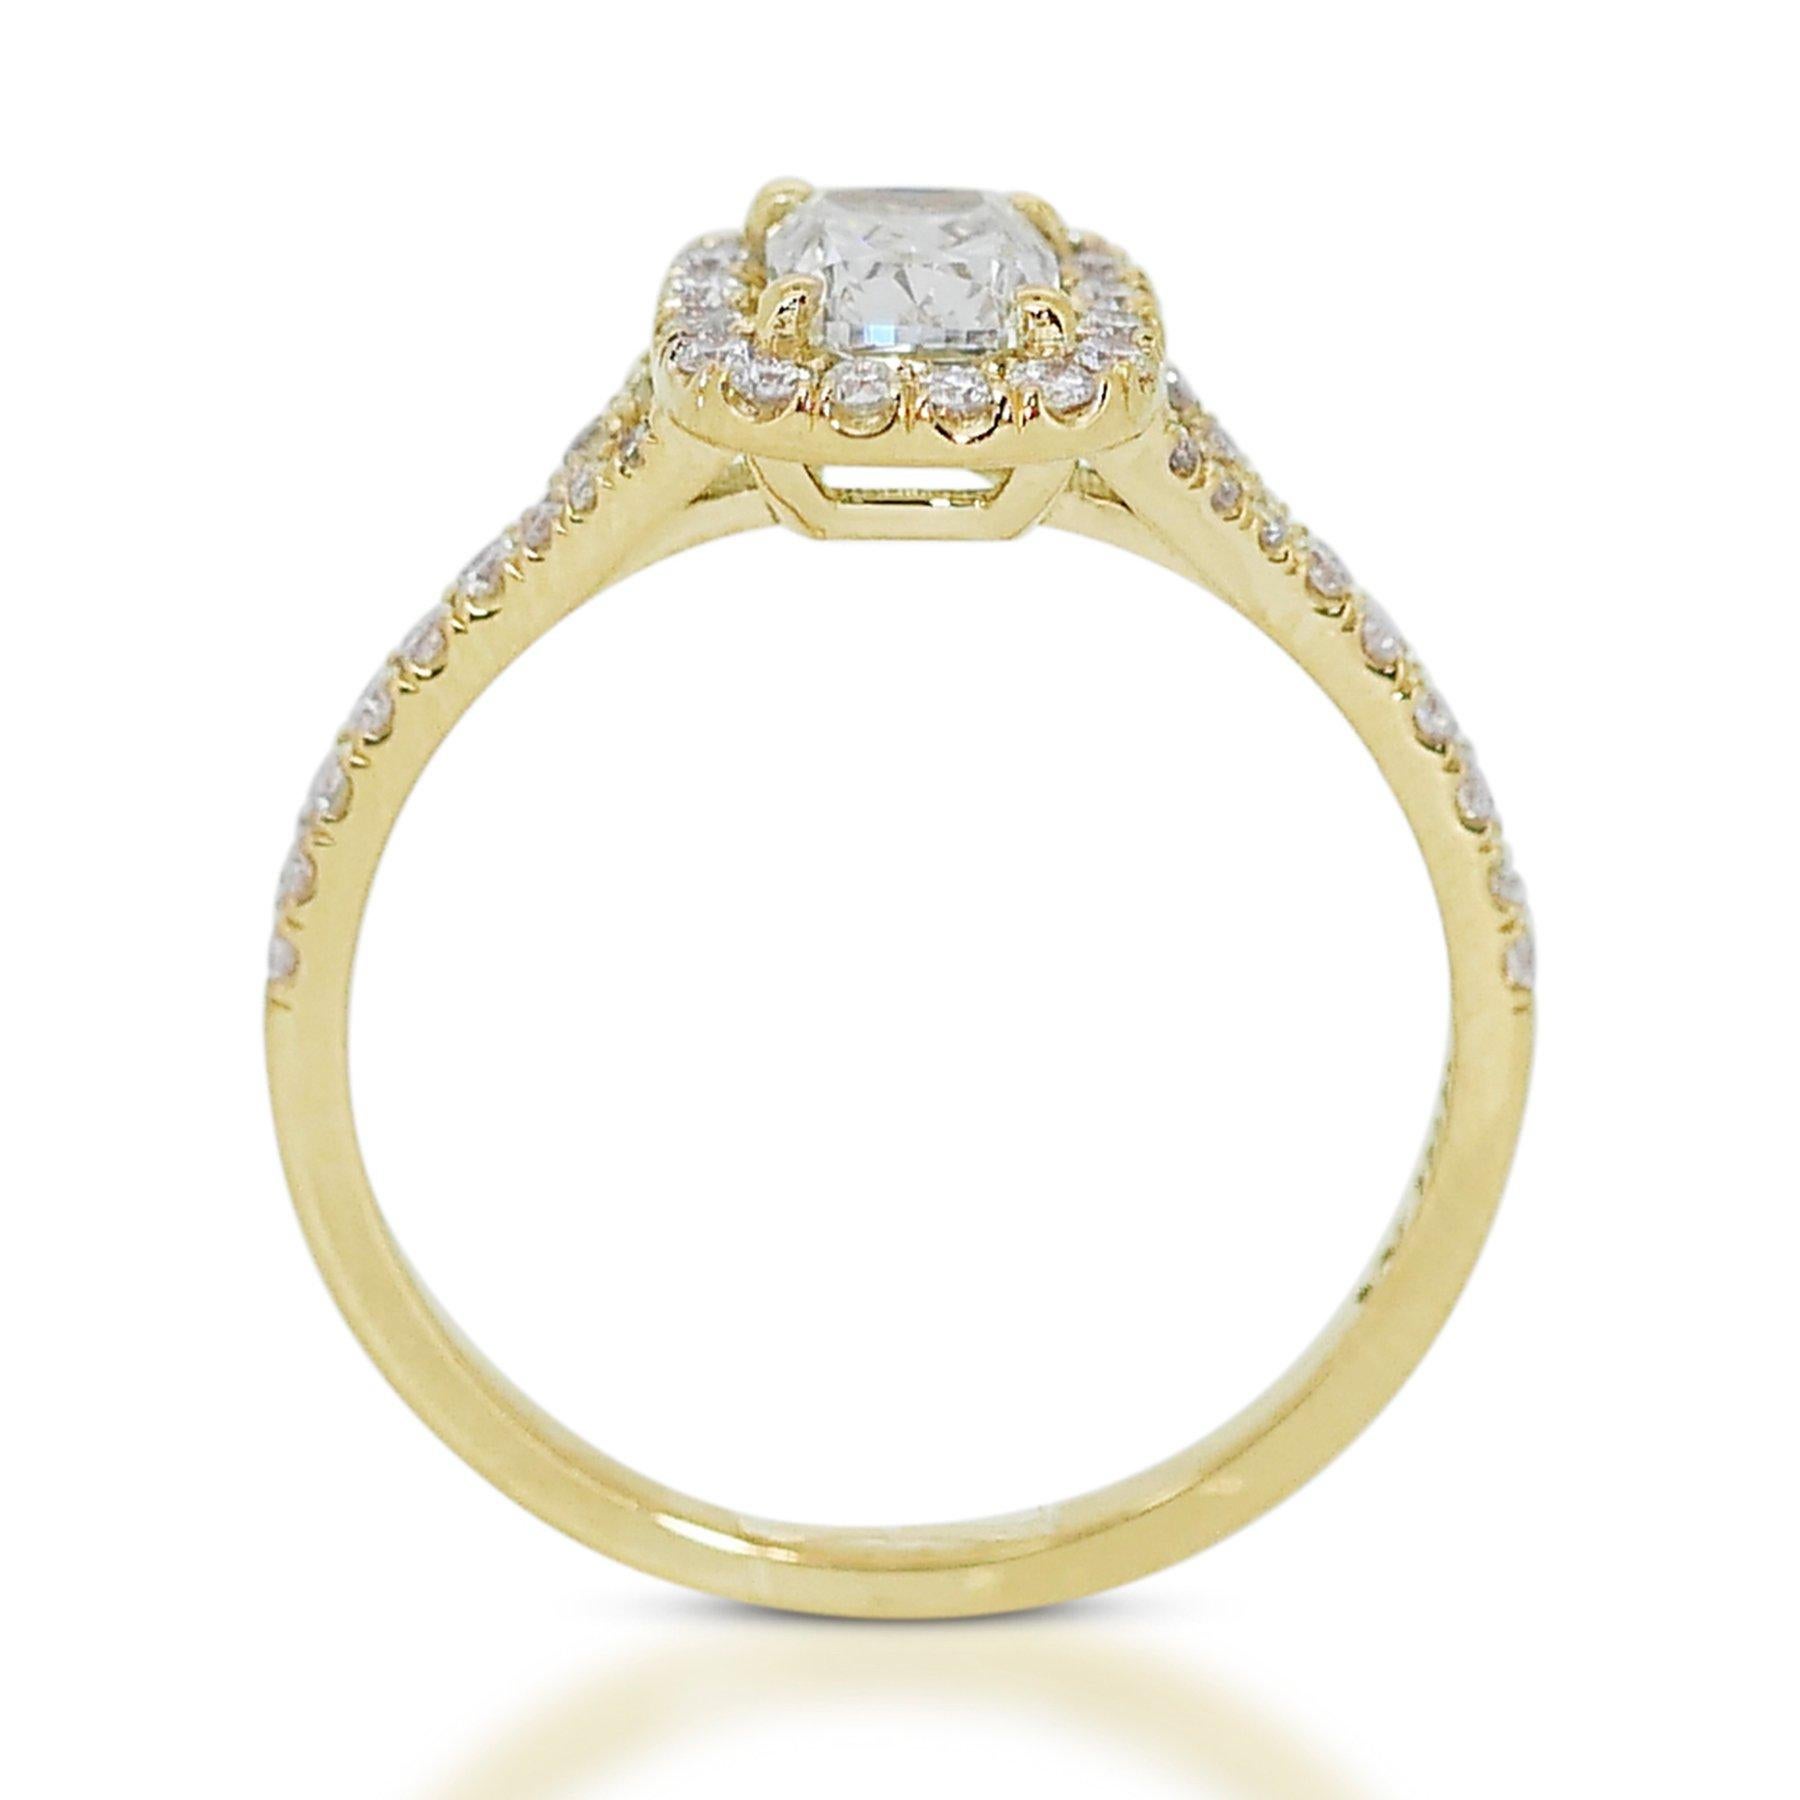 Brilliant 1.33ct Diamond Halo Ring in 18k Yellow Gold – GIA Certified For Sale 1